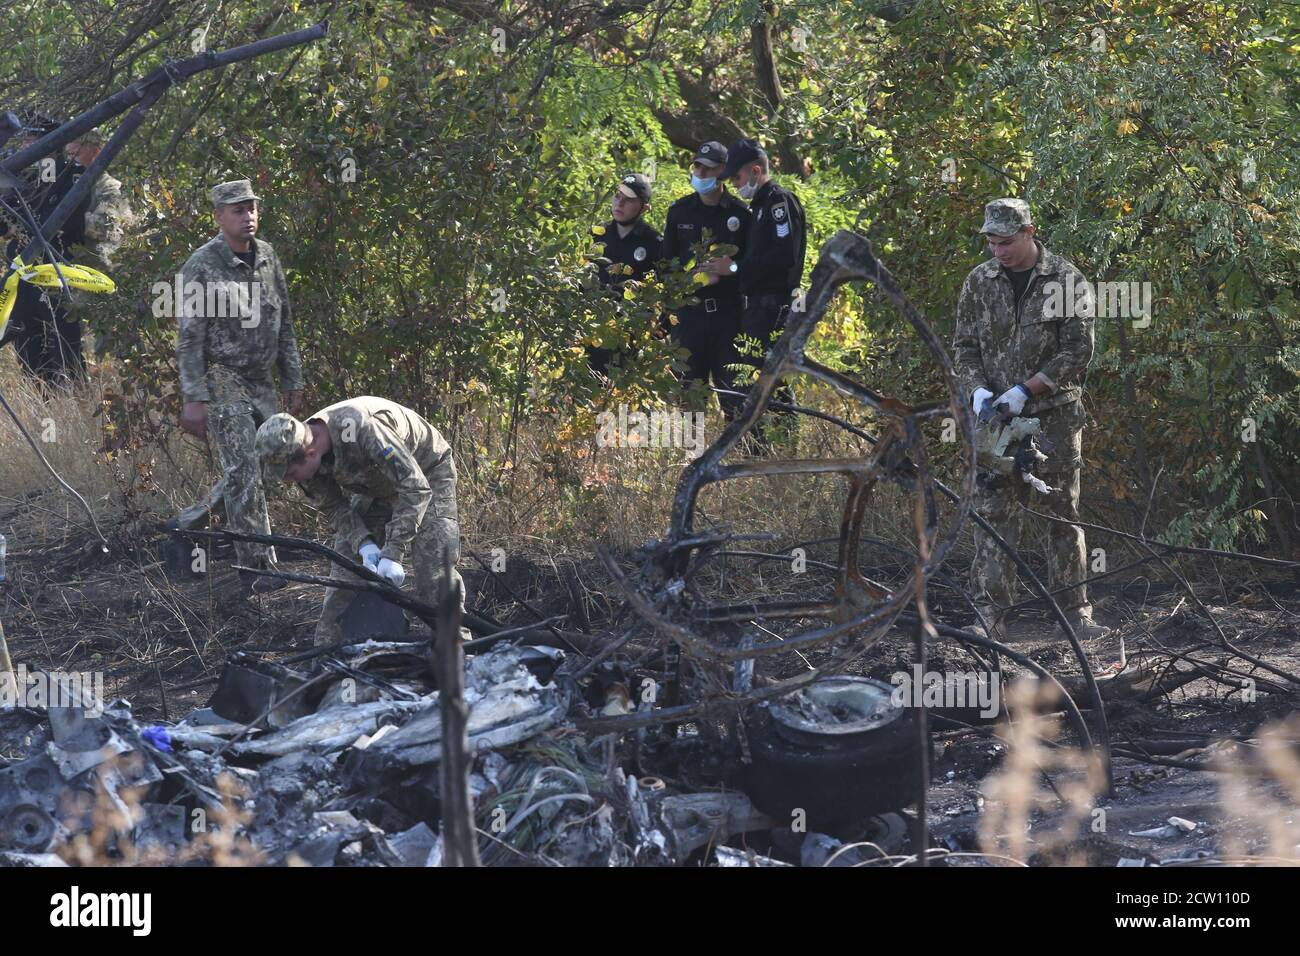 (200926) -- KHARKIV, Sept. 26, 2020 (Xinhua) -- Rescuers cleans the wreckage of the crashed An-26 military aircraft in Chuguev, Kharkiv region, Ukraine, Sept. 26, 2020. The death toll from the Ukrainian military plane crash rose to 26, after one of the two people with serious condition died in hospital, the State Emergency Service of Ukraine said on Saturday. The An-26 military aircraft with 27 people on board crashed on Friday. The plane was performing a training flight and was landing at the airfield of a military base near the city of Chuguev, Kharkiv region. (Photo by Sergey Starostenko Stock Photo